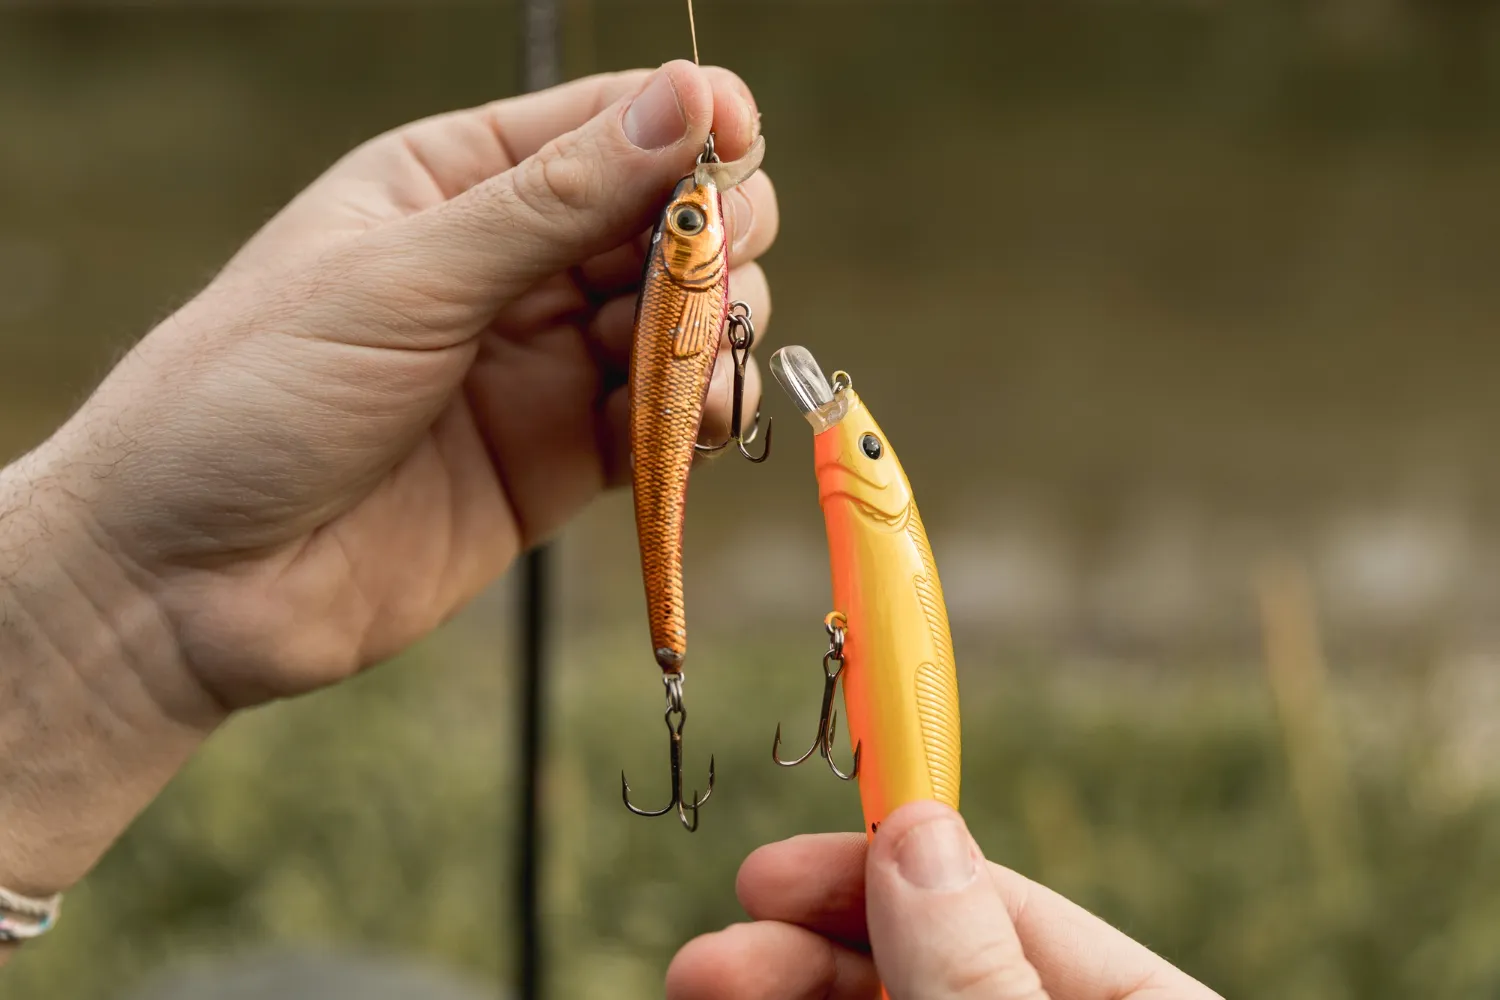 Ice Fishing Bait Guide: Top Lures and Live Options - Pokeys Tackle Shop